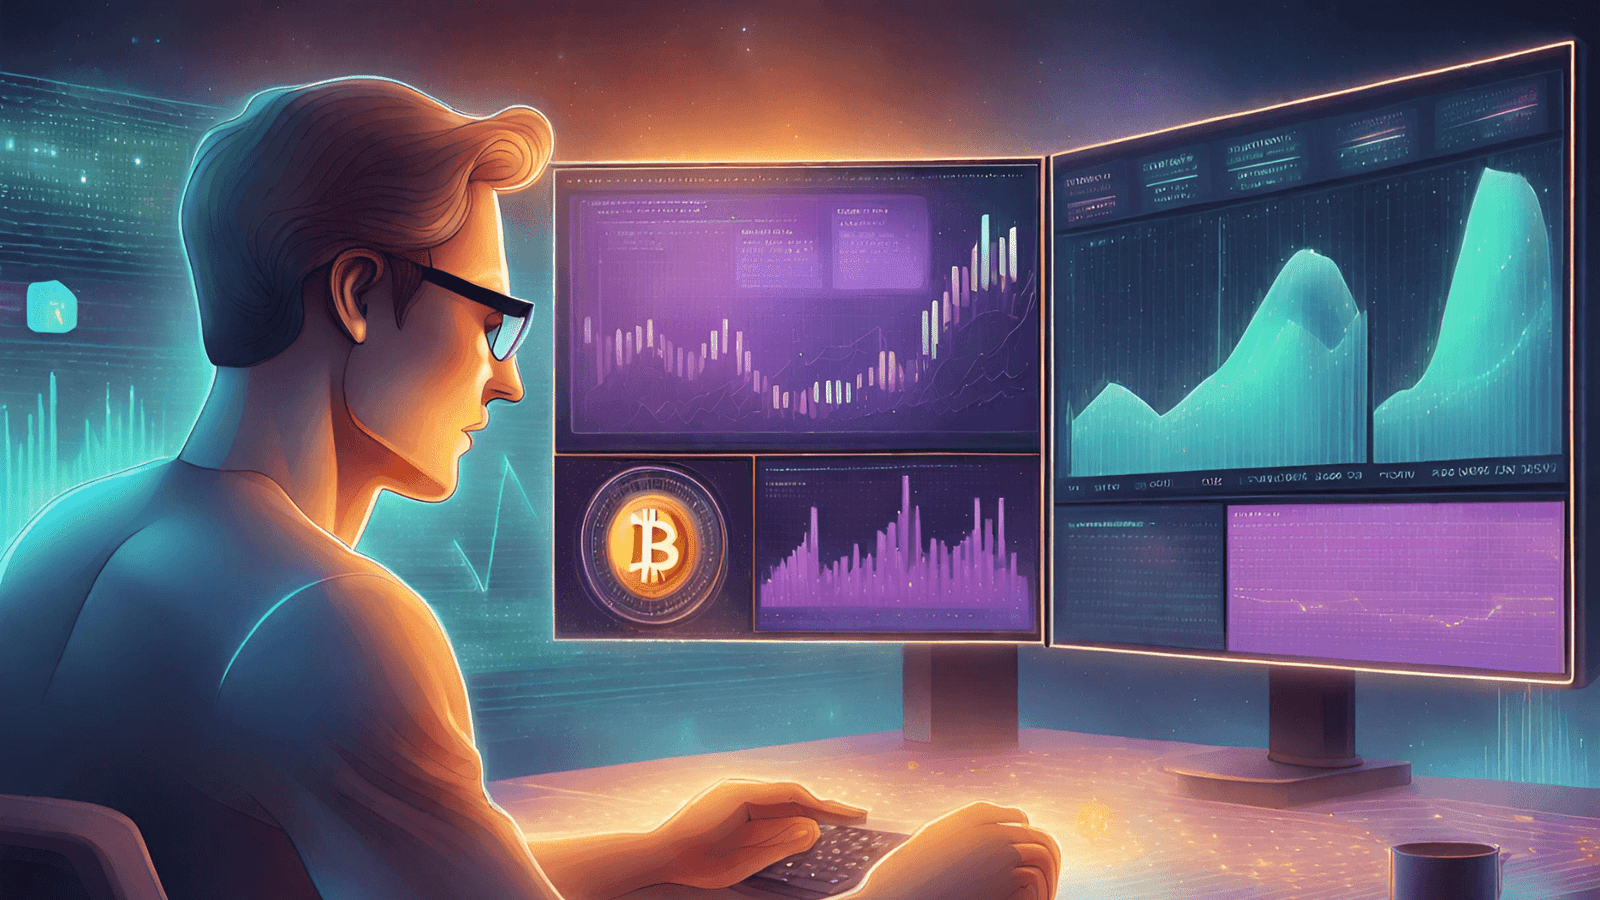 Predicting the Future: Anticipating Cryptocurrency Prices with Machine Learning